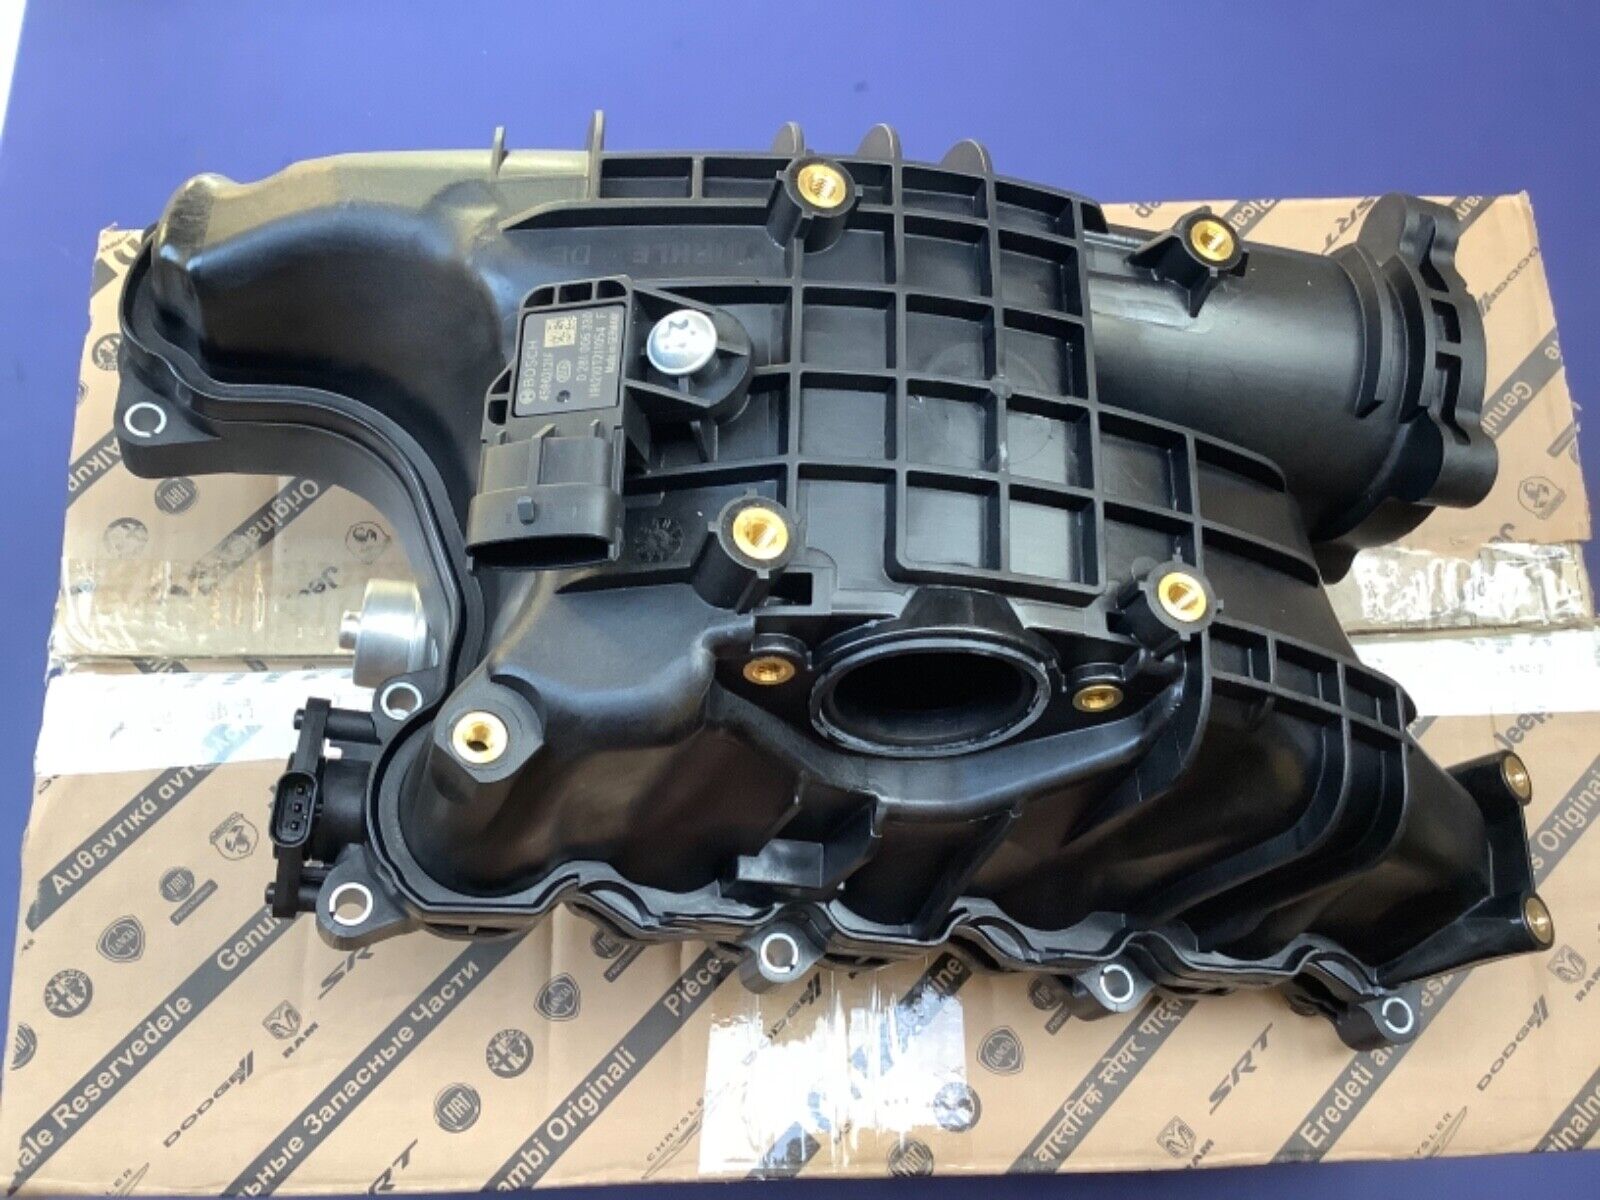 "Rev Up Your Journey: Genuine WK Grand Cherokee Diesel Manifolds Now Available at Just Jeeps for $2200 – Unleash Power and Performance!"